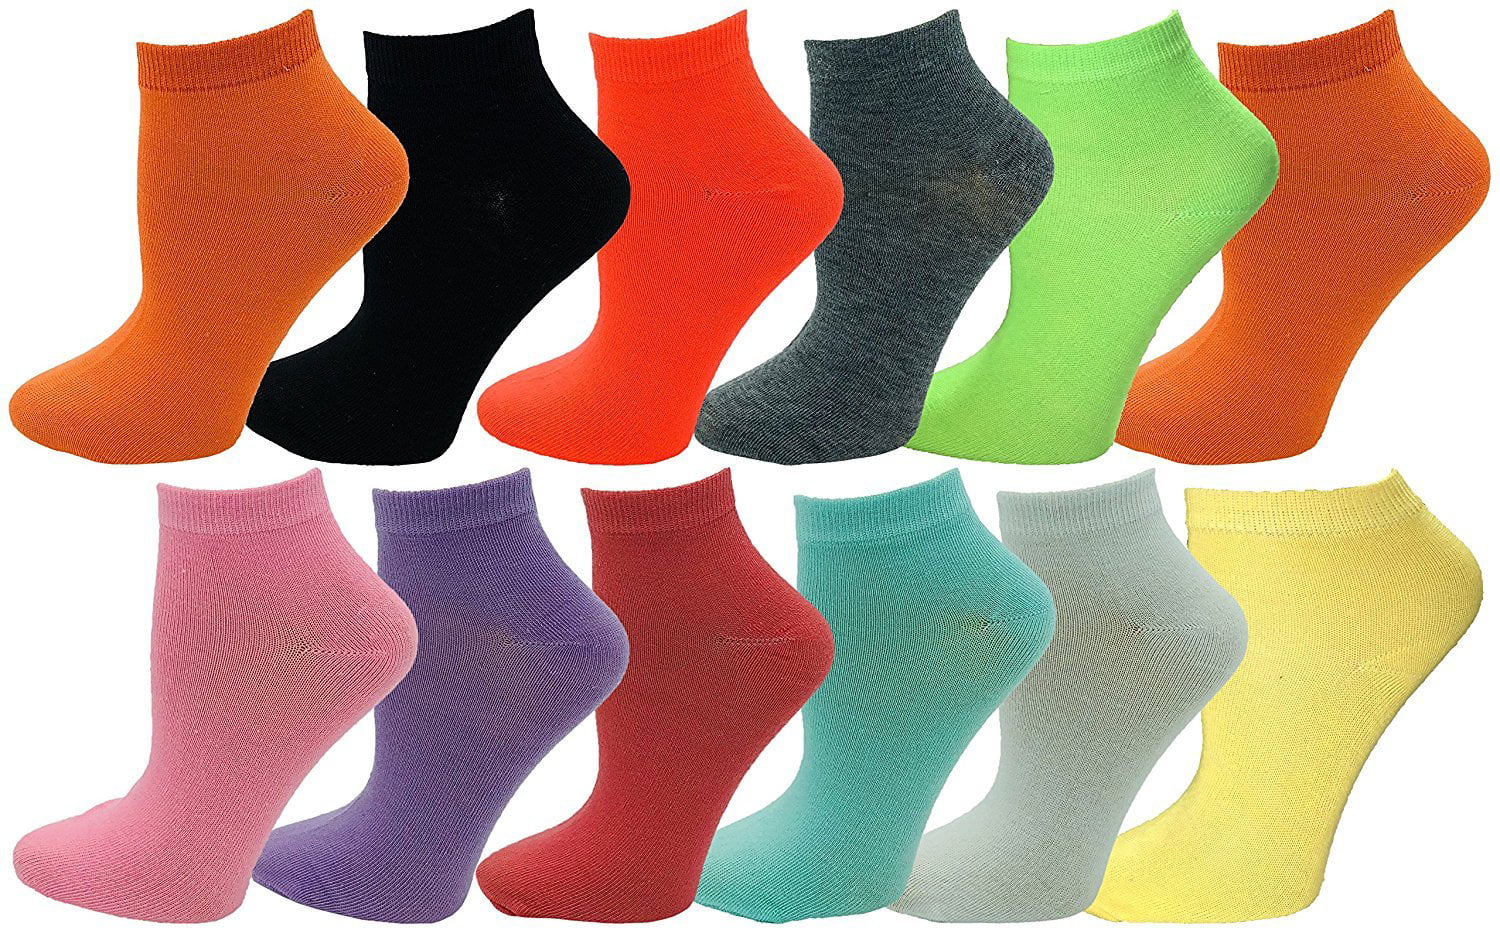 Winterlace No Show Ankle Socks Womens Or Girls 12 Pairs Fun Funky Patterned Designs